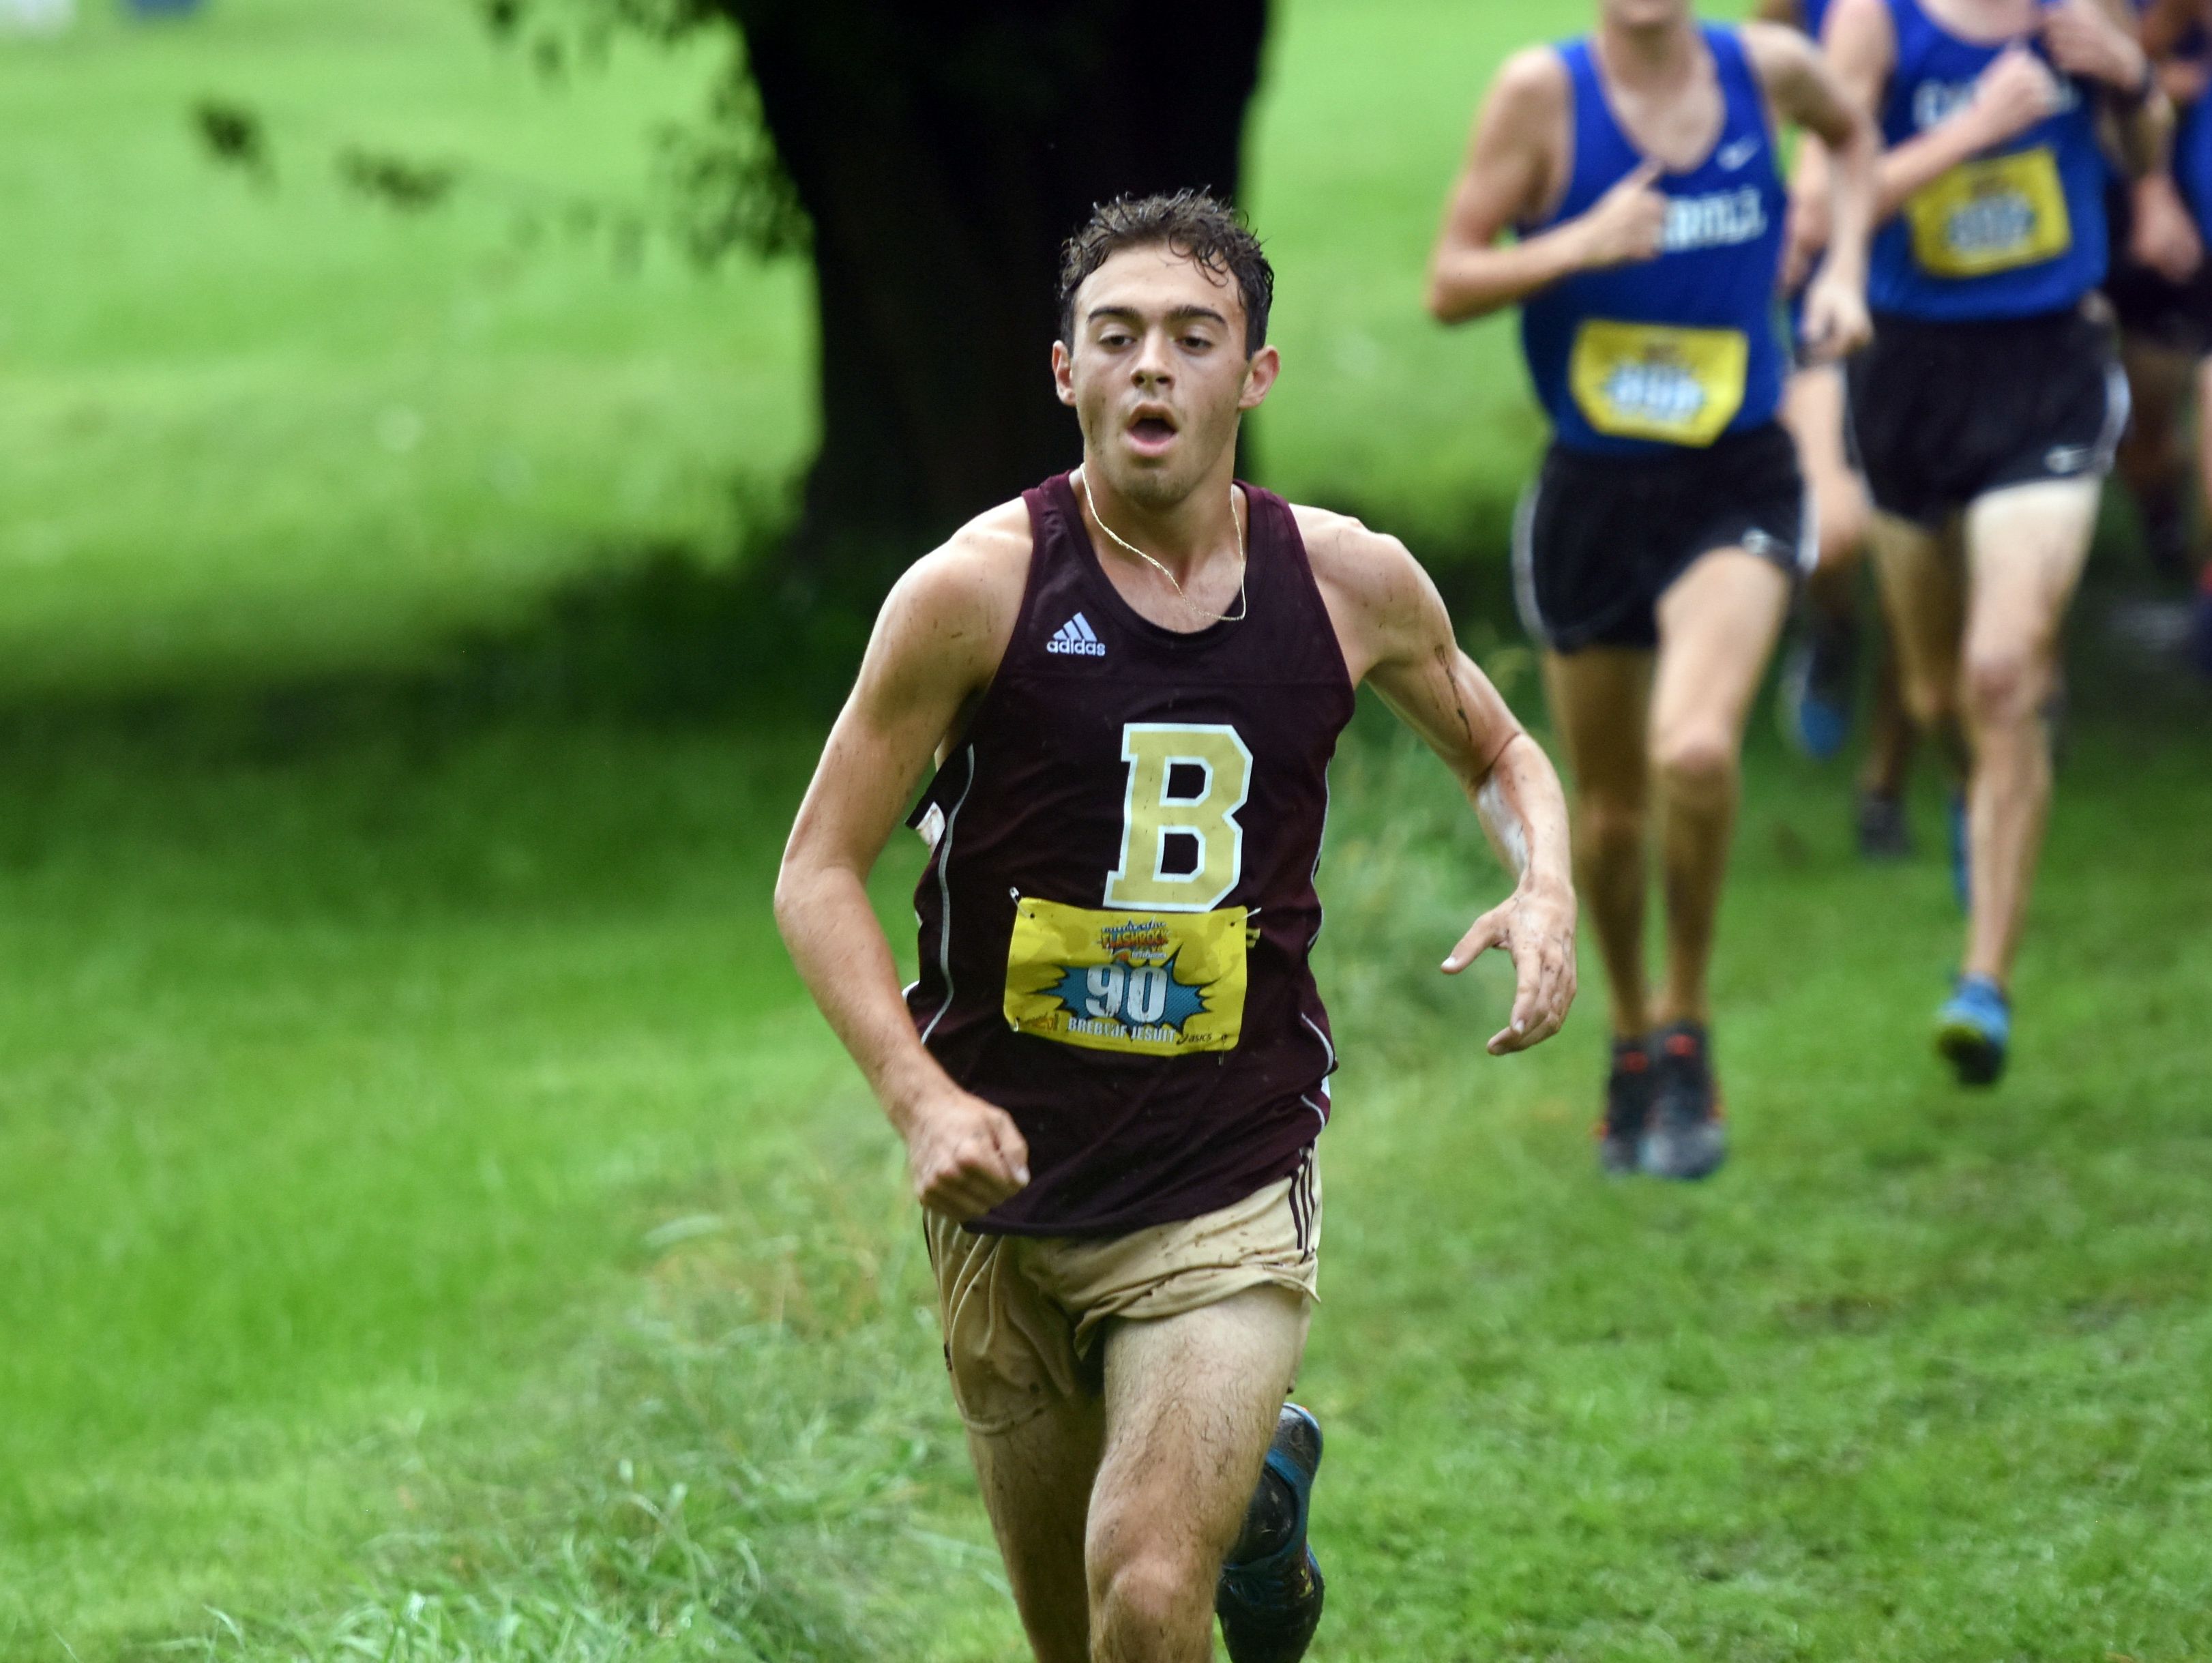 Brady Harless leads the Brebeuf charge as the Braves host a sectional Saturday.